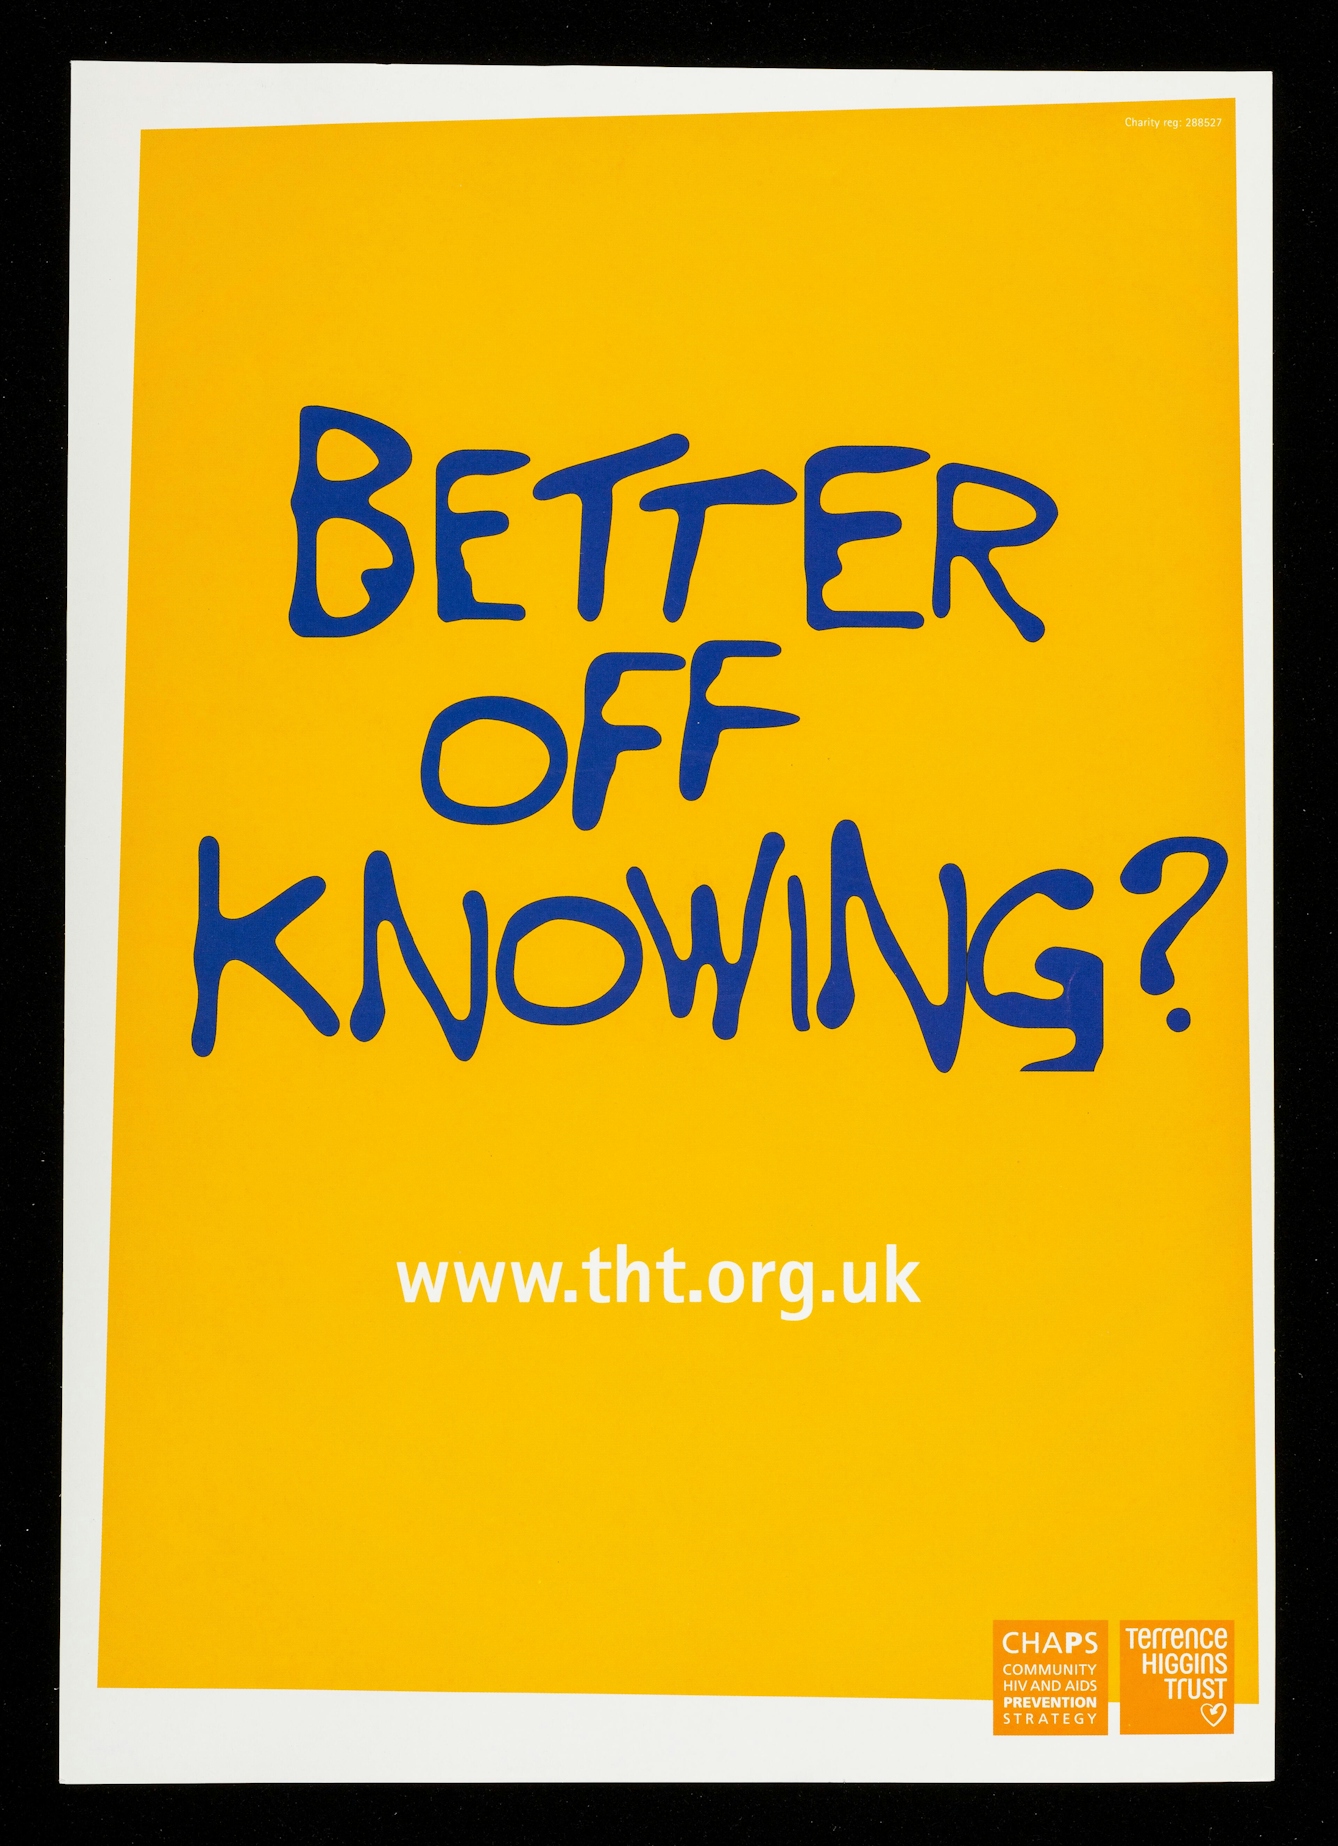 Yellow poster reading "Better off knowing?" indicating that it would be better off to know if you have HIV/AIDS.